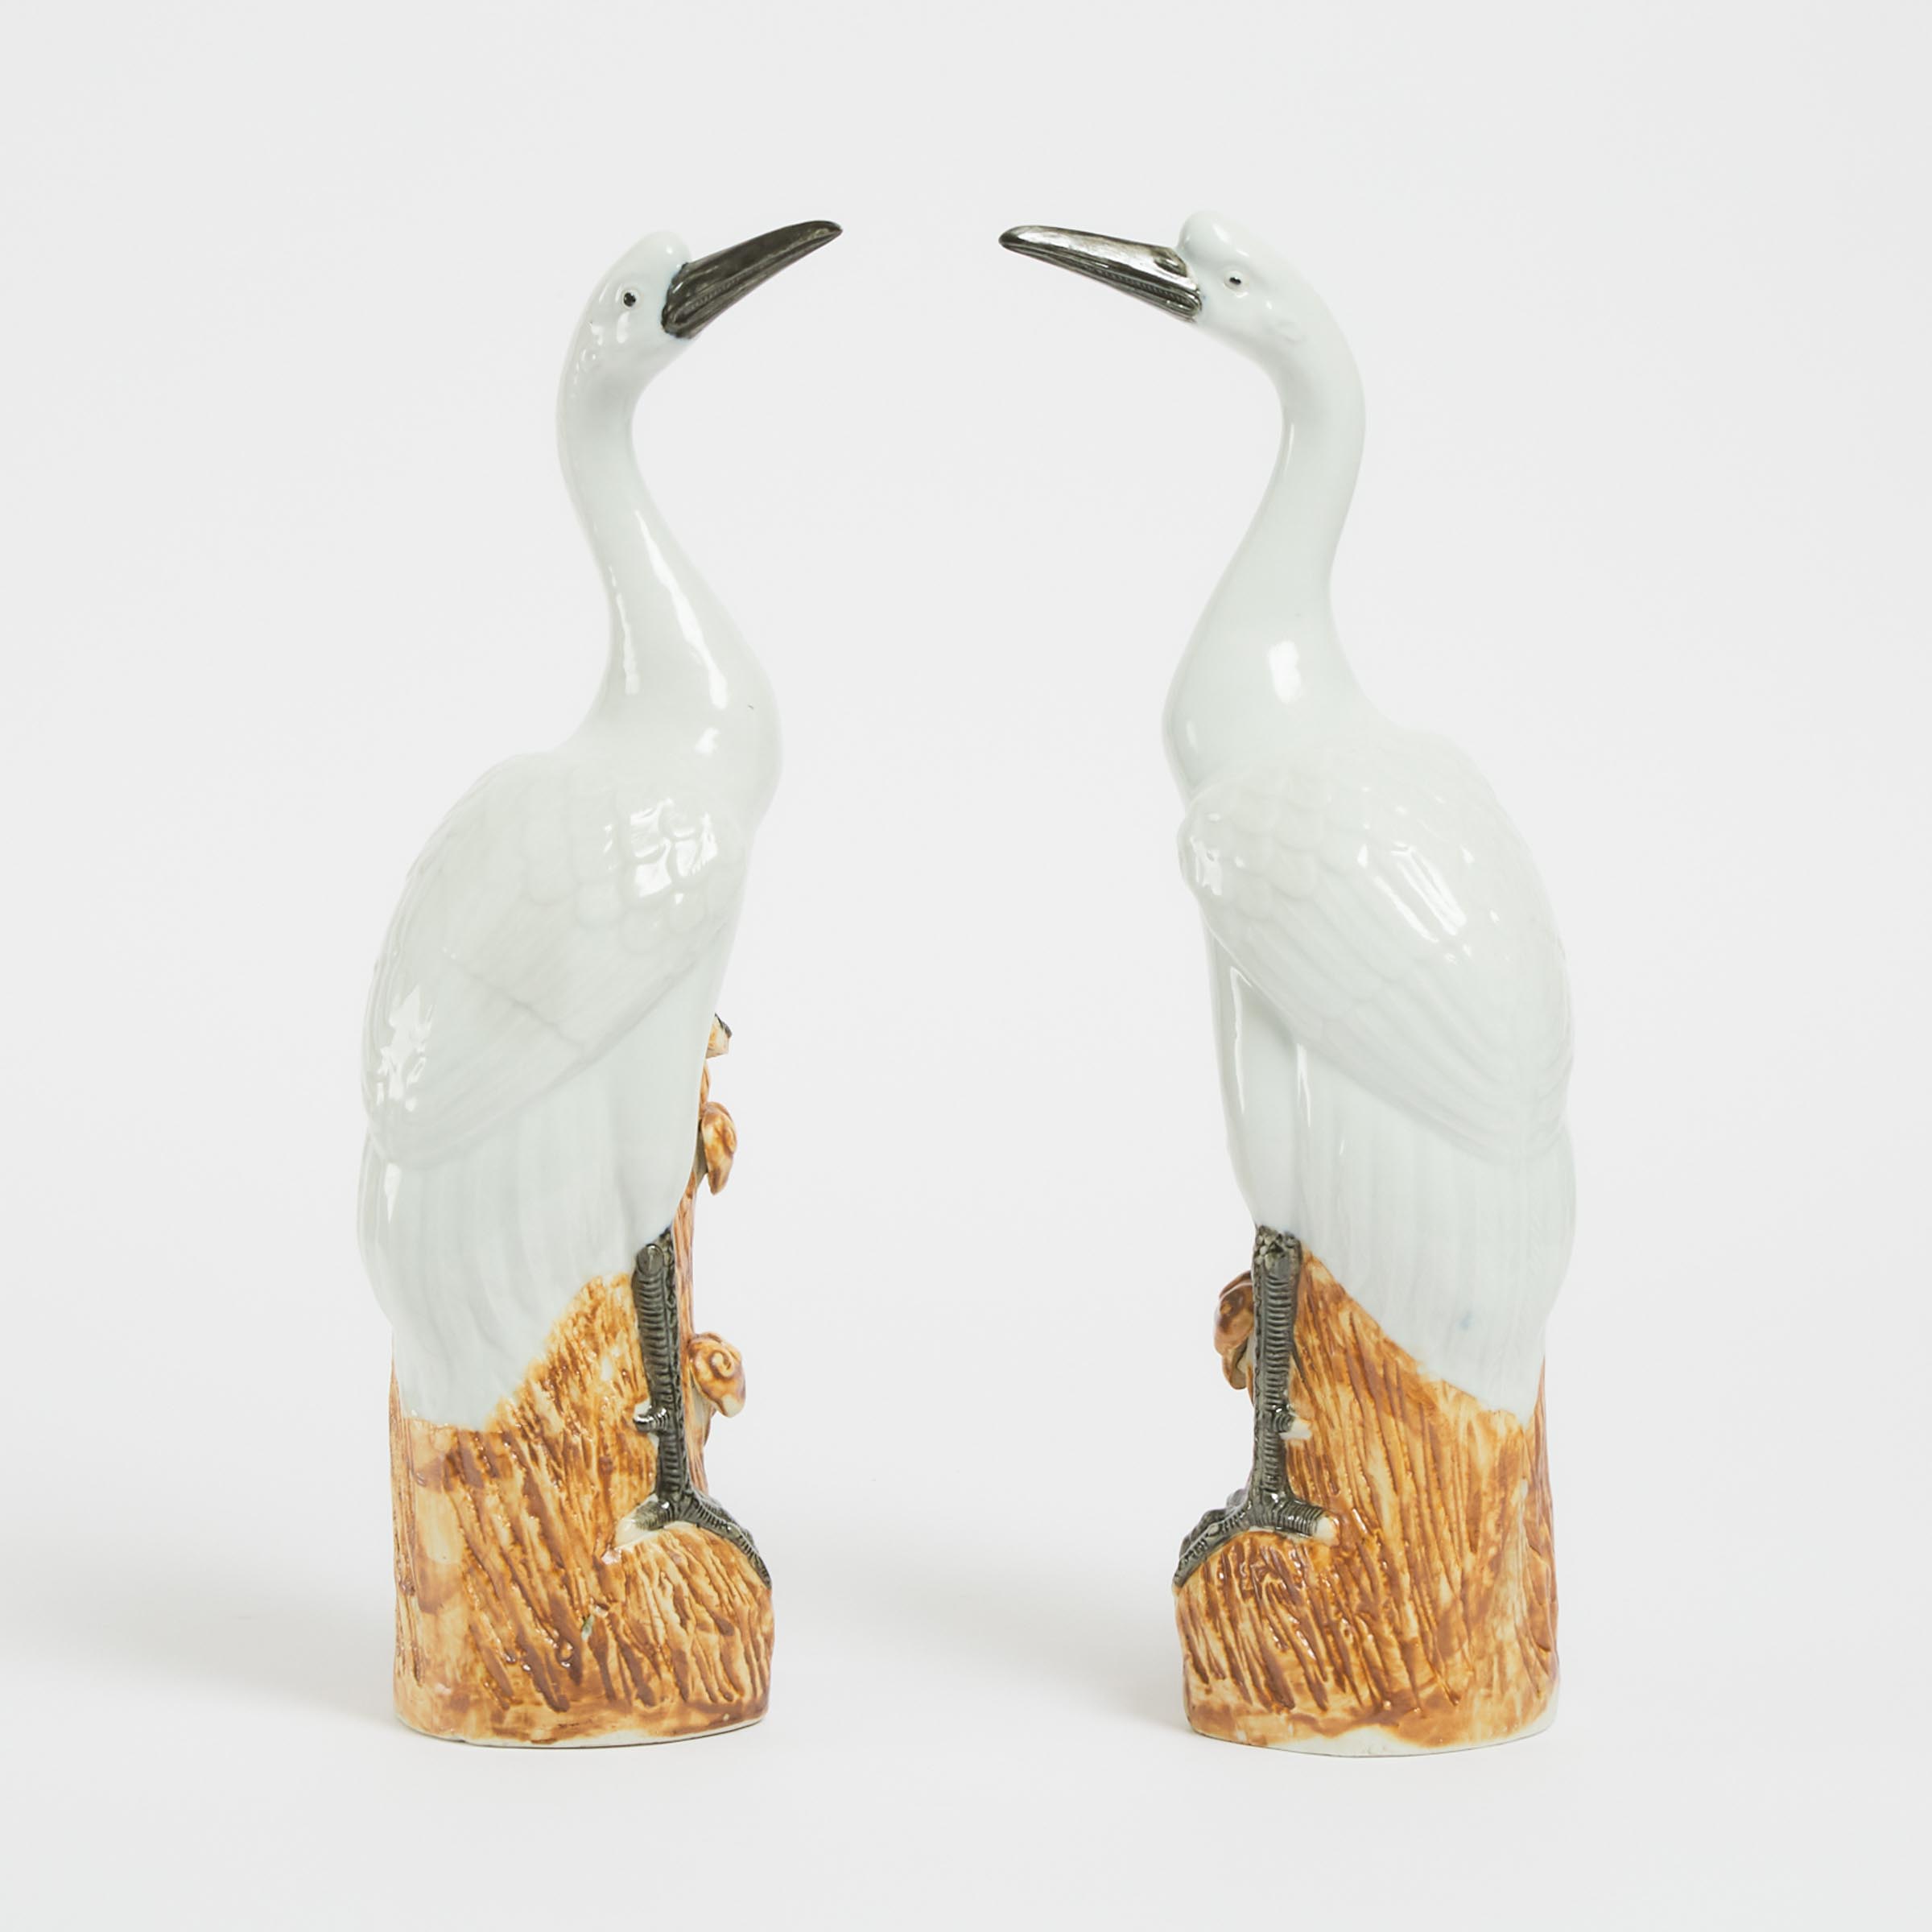 A Pair of Chinese Porcelain Cranes, Republican Period